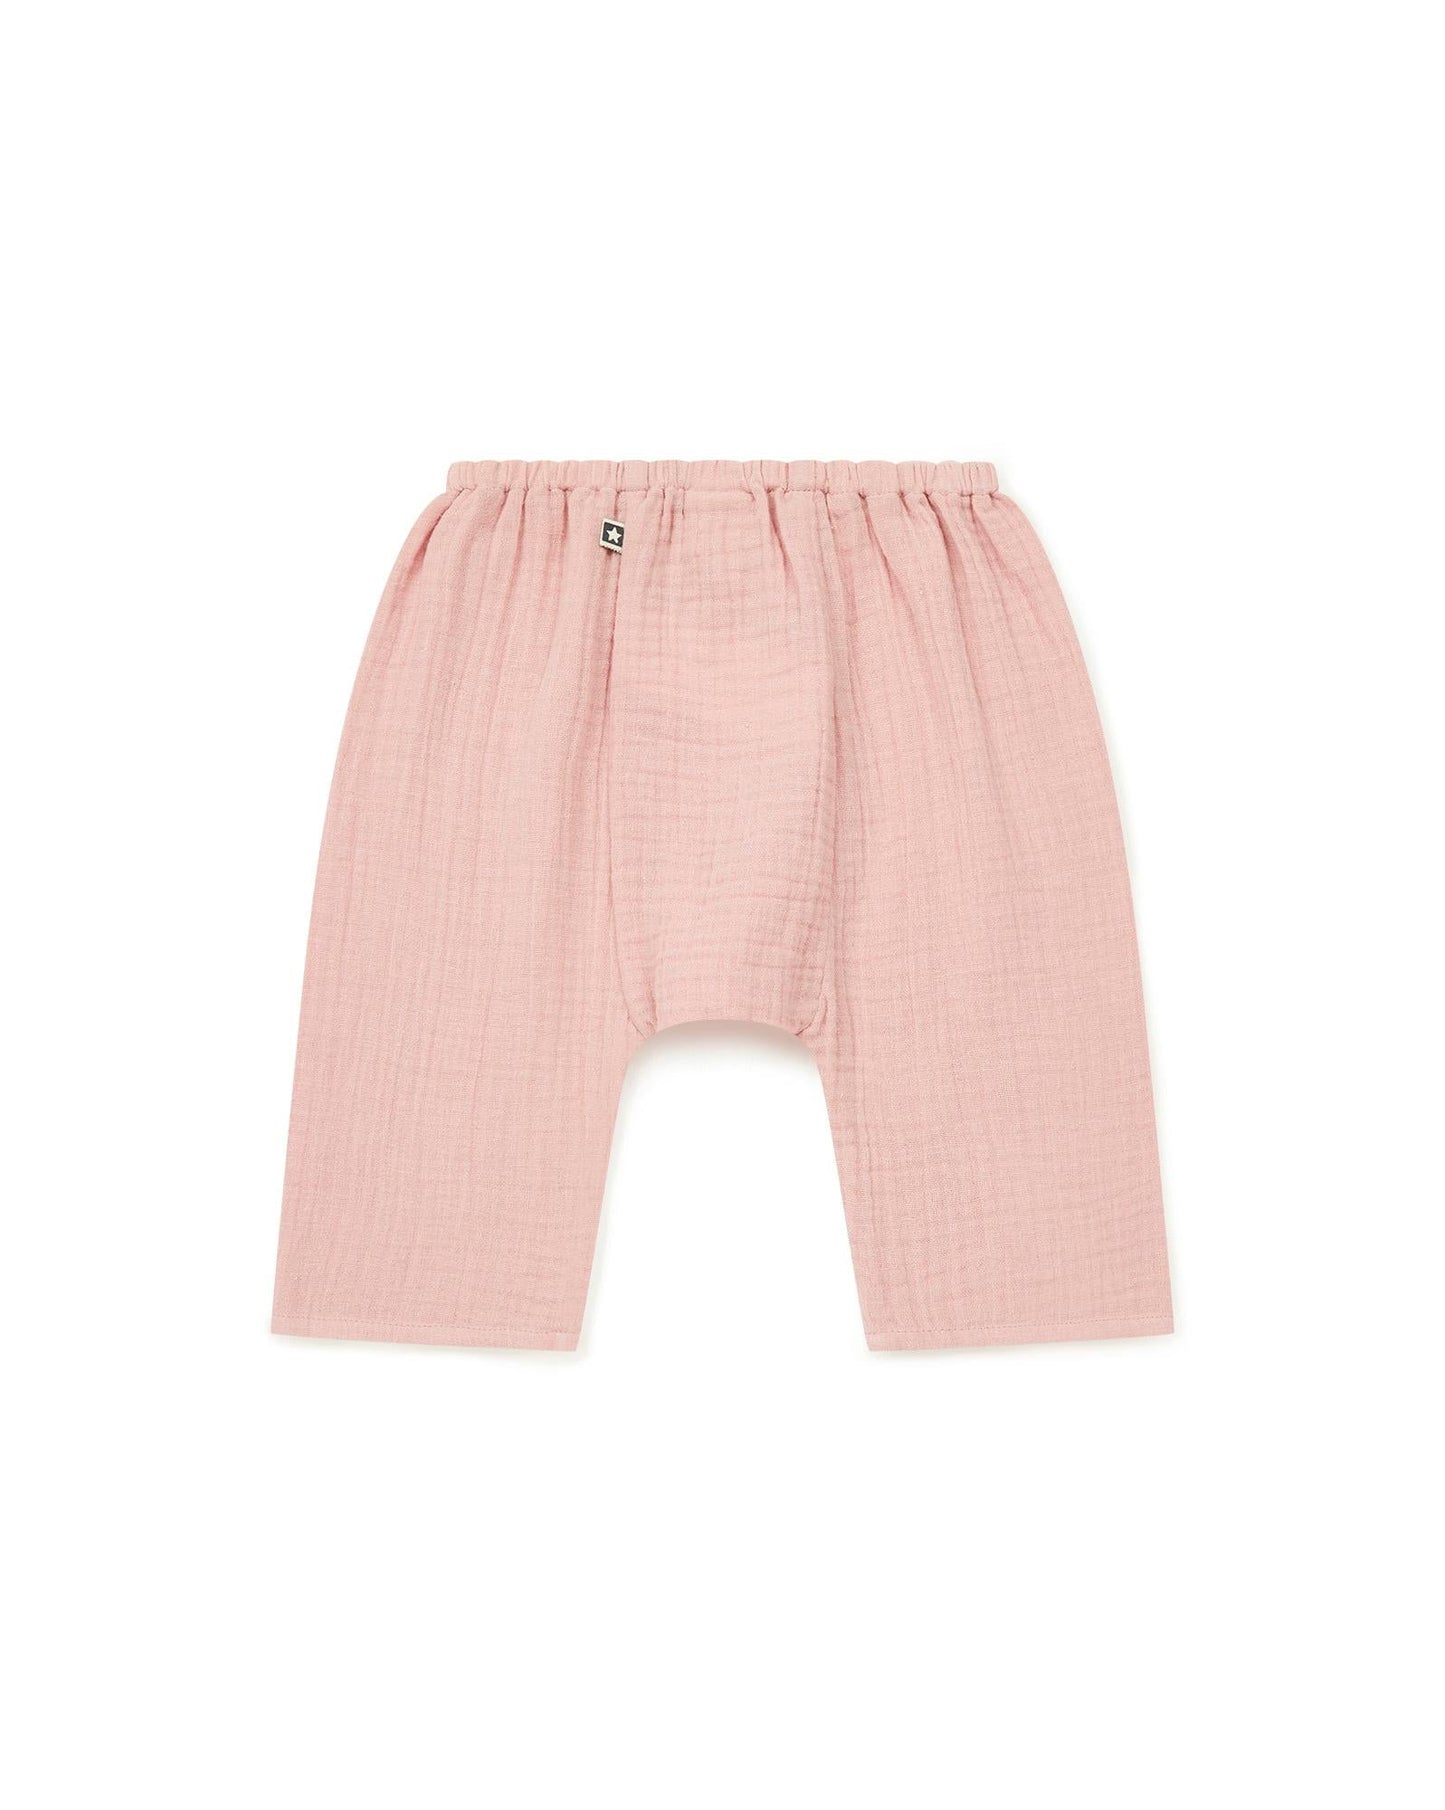 Trousers - Laos Pink Baby in 100% organic cotton certified GOTS